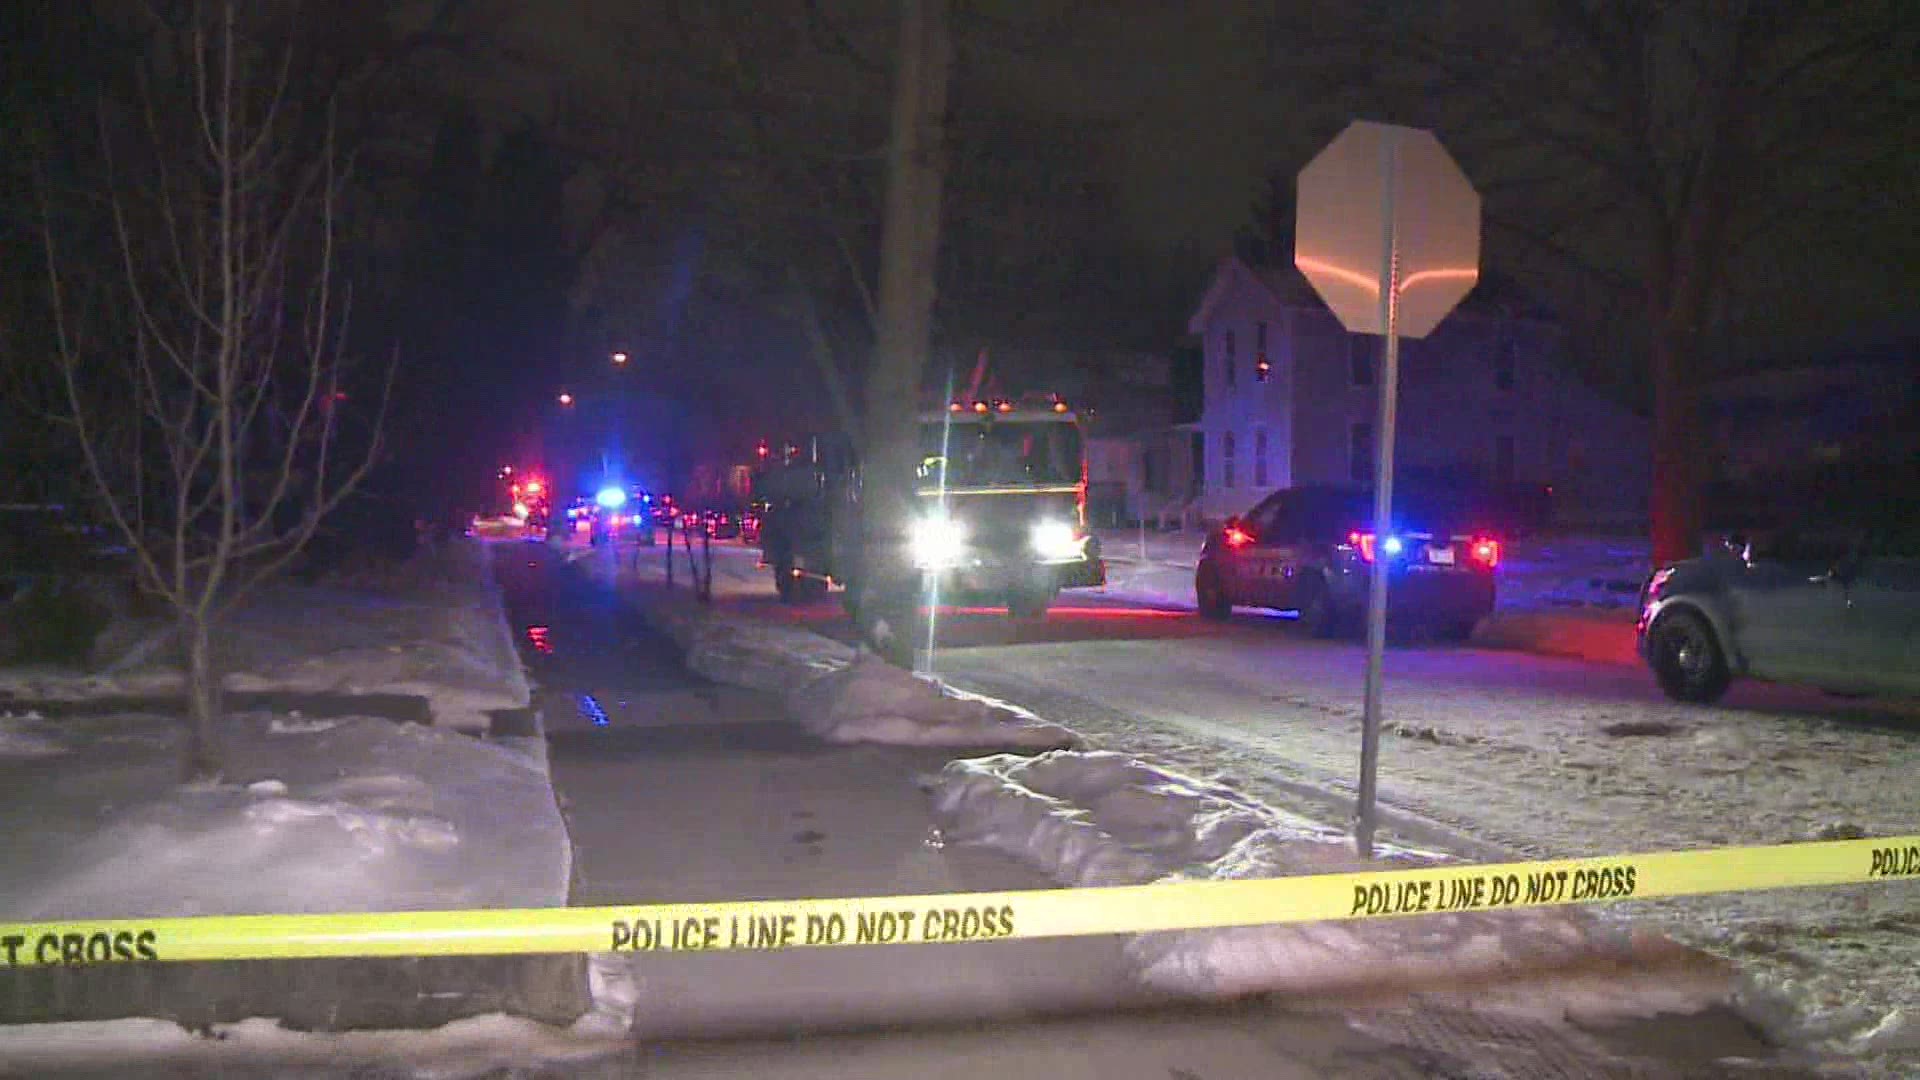 Grand Rapids police are investigating an overnight stabbing that injured three people. There could be a fourth stabbing victim, but that person has not been located.